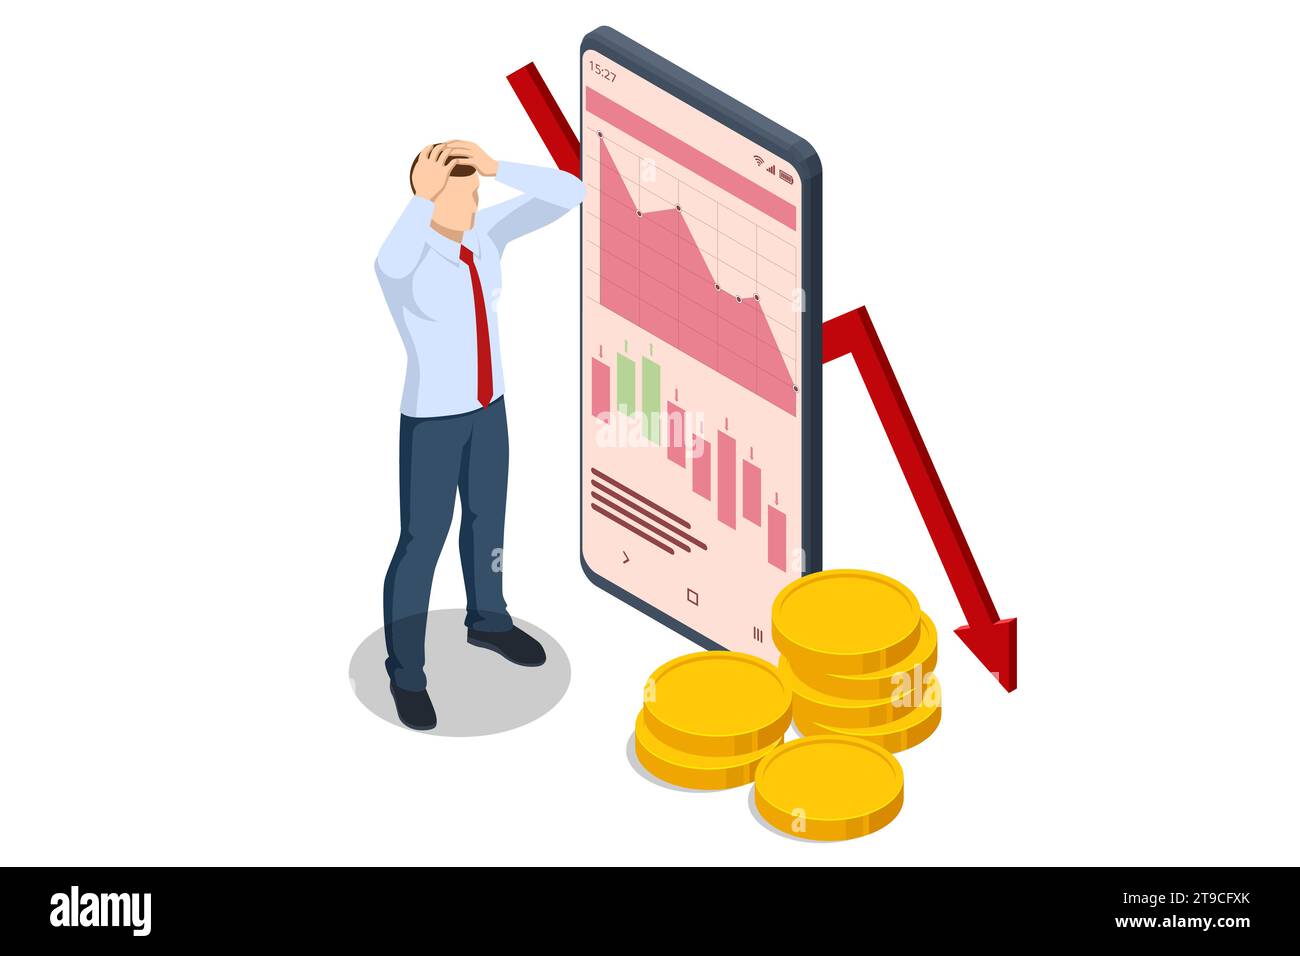 Isometric decreasing trend showing unsuccessful performance and losses failure due to the economic crisis Stock Vector